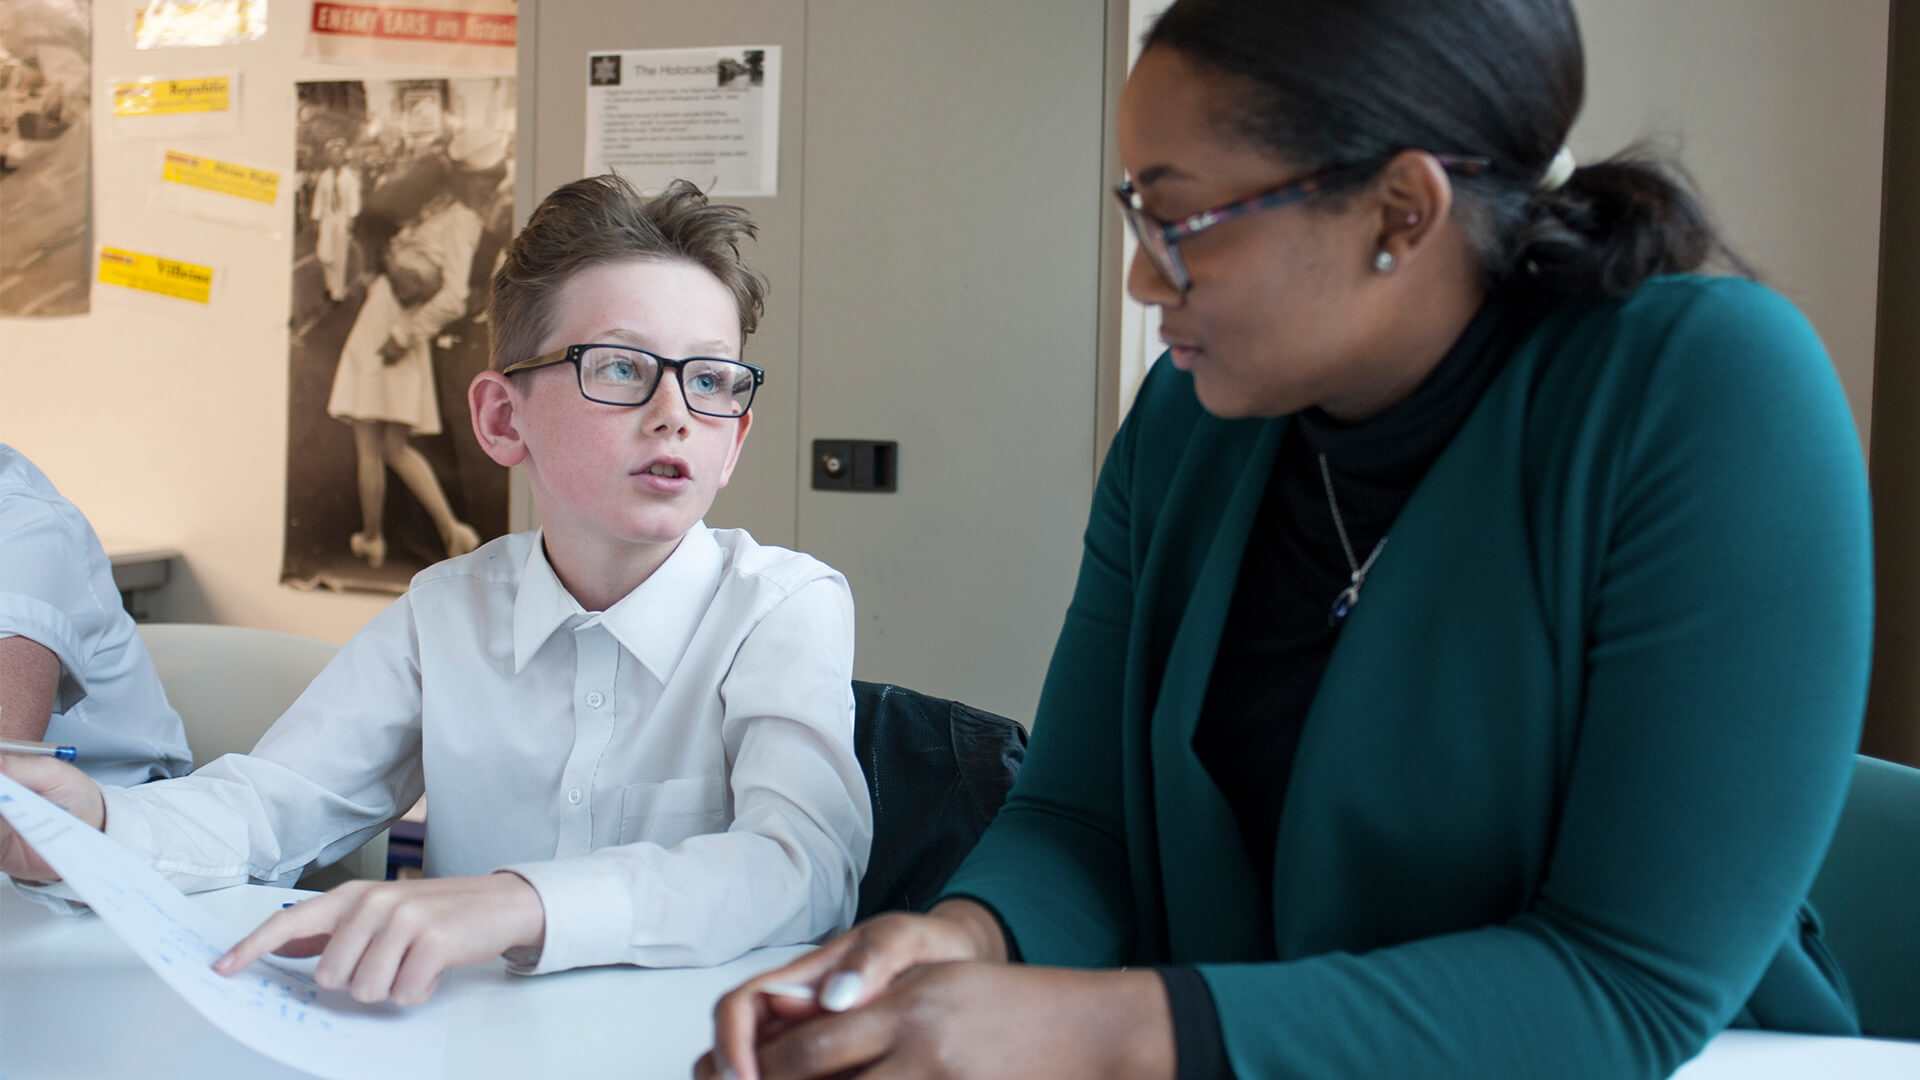 a boy wearing school uniform and glasses sits on his desk holding a paper asking help from his teacher sitting beside him in the classroom